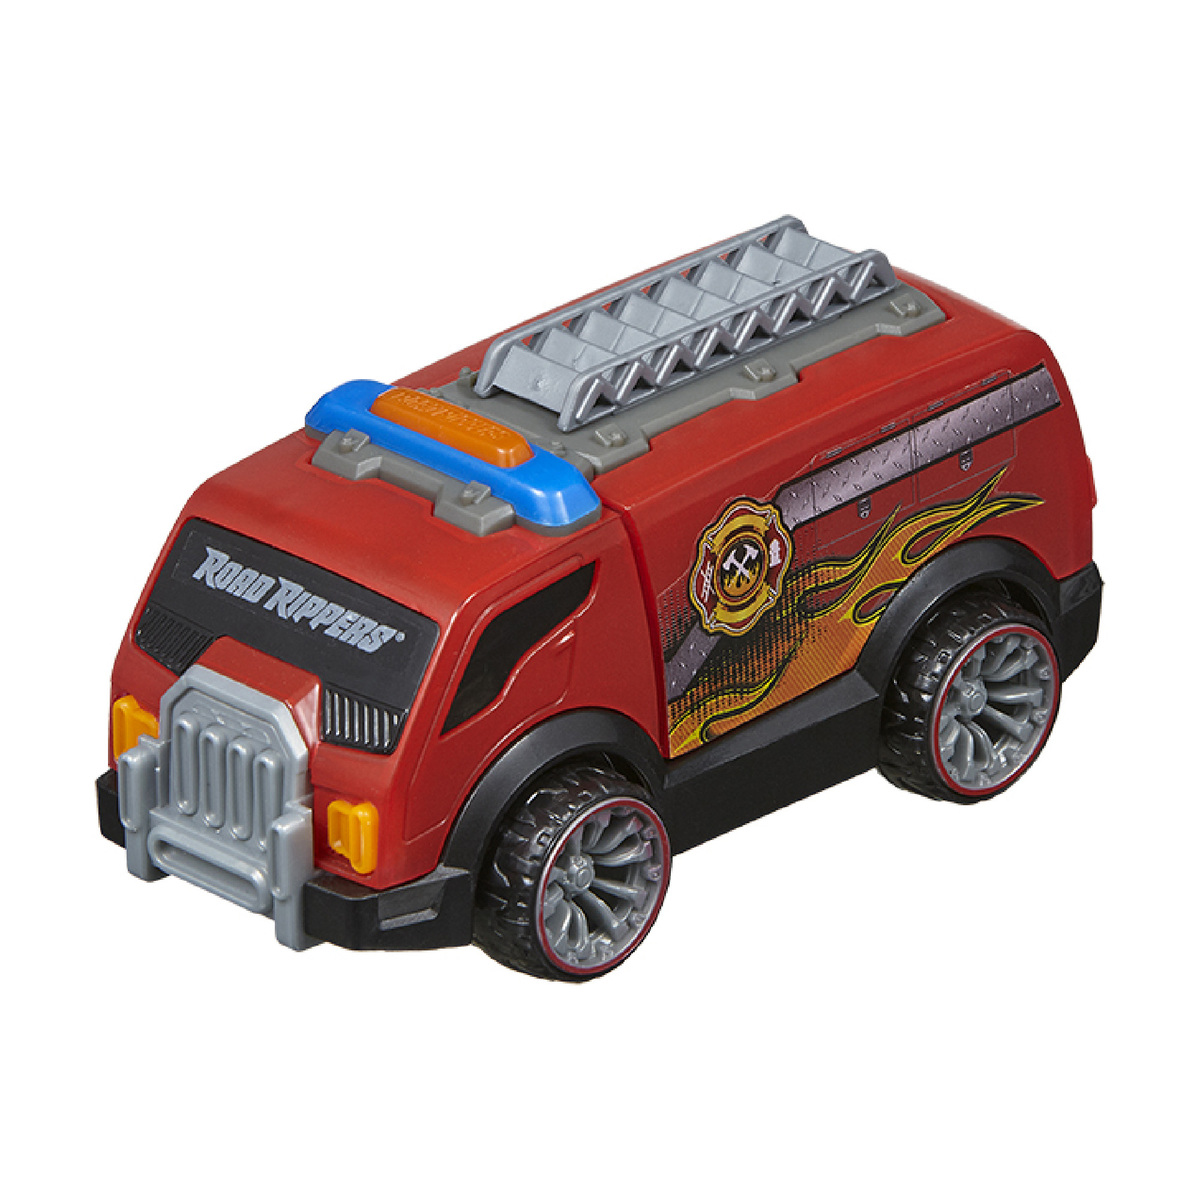 Road Rippers Rescue Flasherz Vehicle 20080 Assorted 1Pc